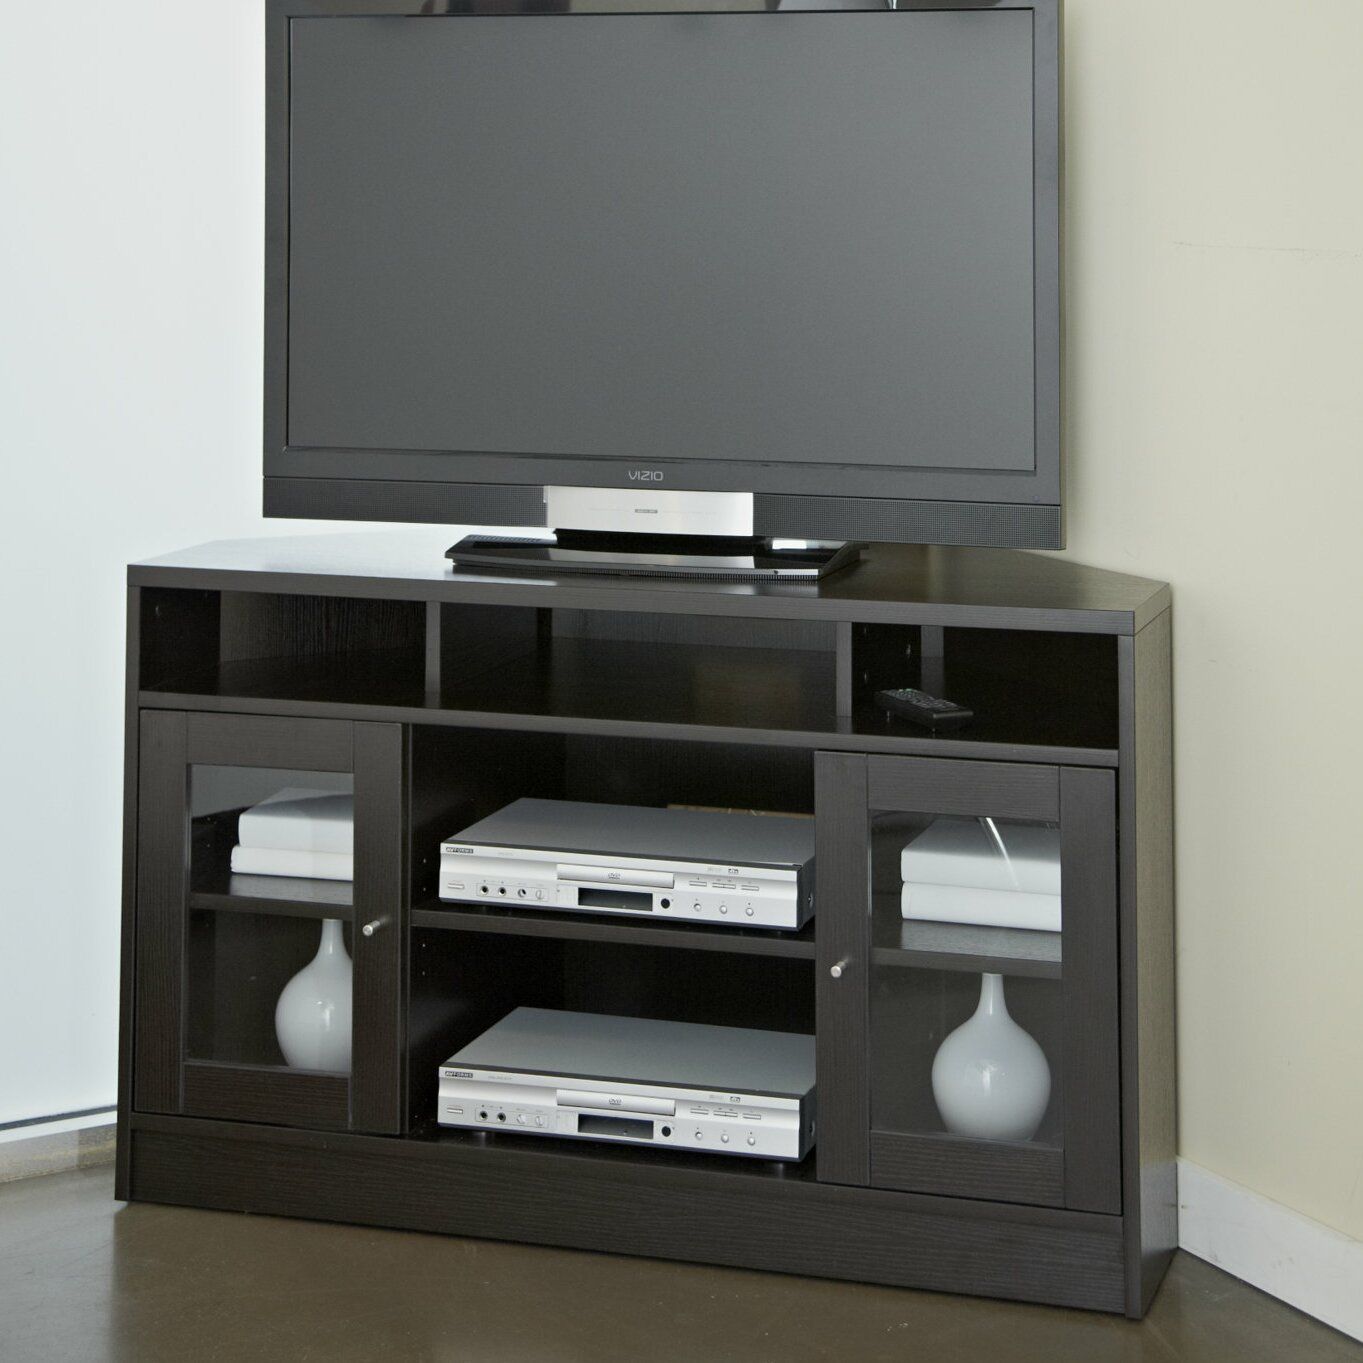 Unique Furniture Corner Tv Stand & Reviews | Wayfair Pertaining To Unusual Tv Cabinets (View 2 of 15)